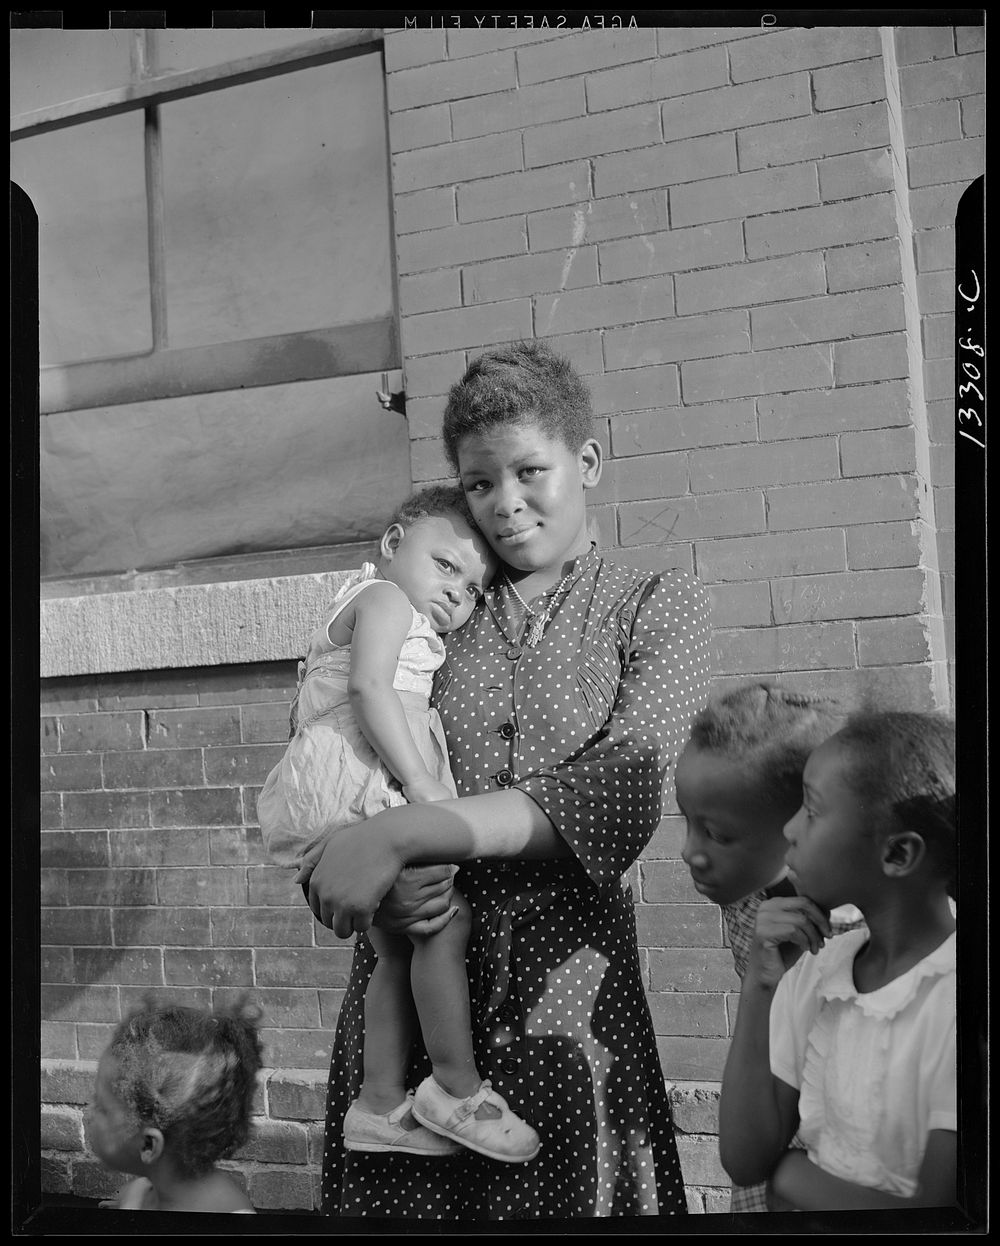 Washington, D.C. Young girl with her sister who live on Seaton Road. Sourced from the Library of Congress.